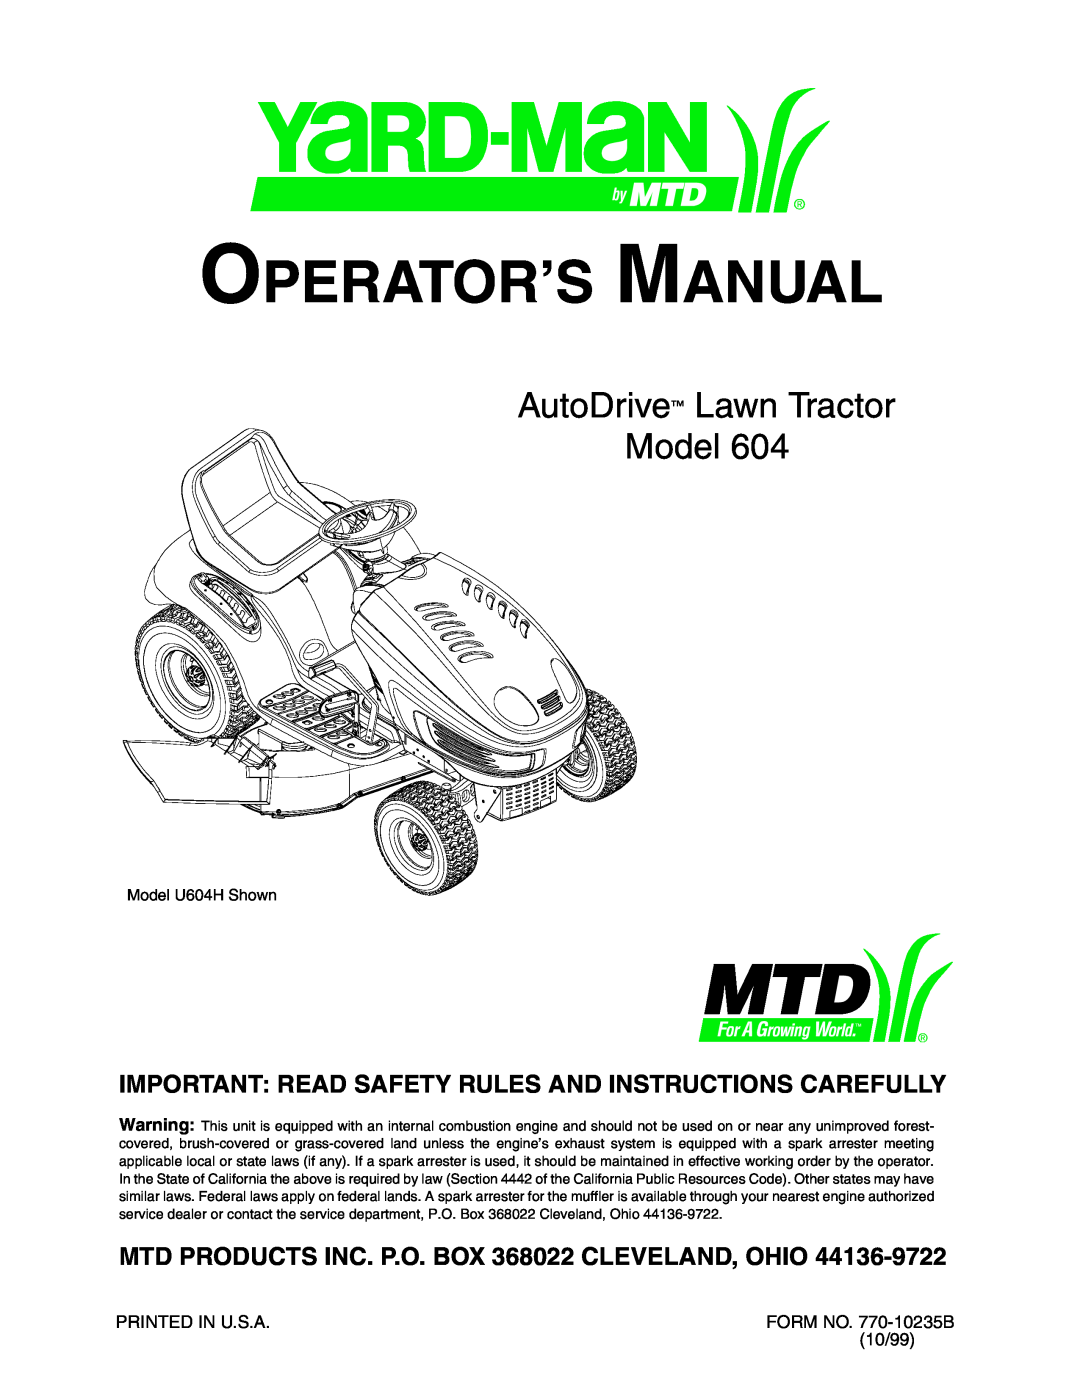 MTD 604 manual Important Read Safety Rules And Instructions Carefully, MTD PRODUCTS INC. P.O. BOX 368022 CLEVELAND, OHIO 